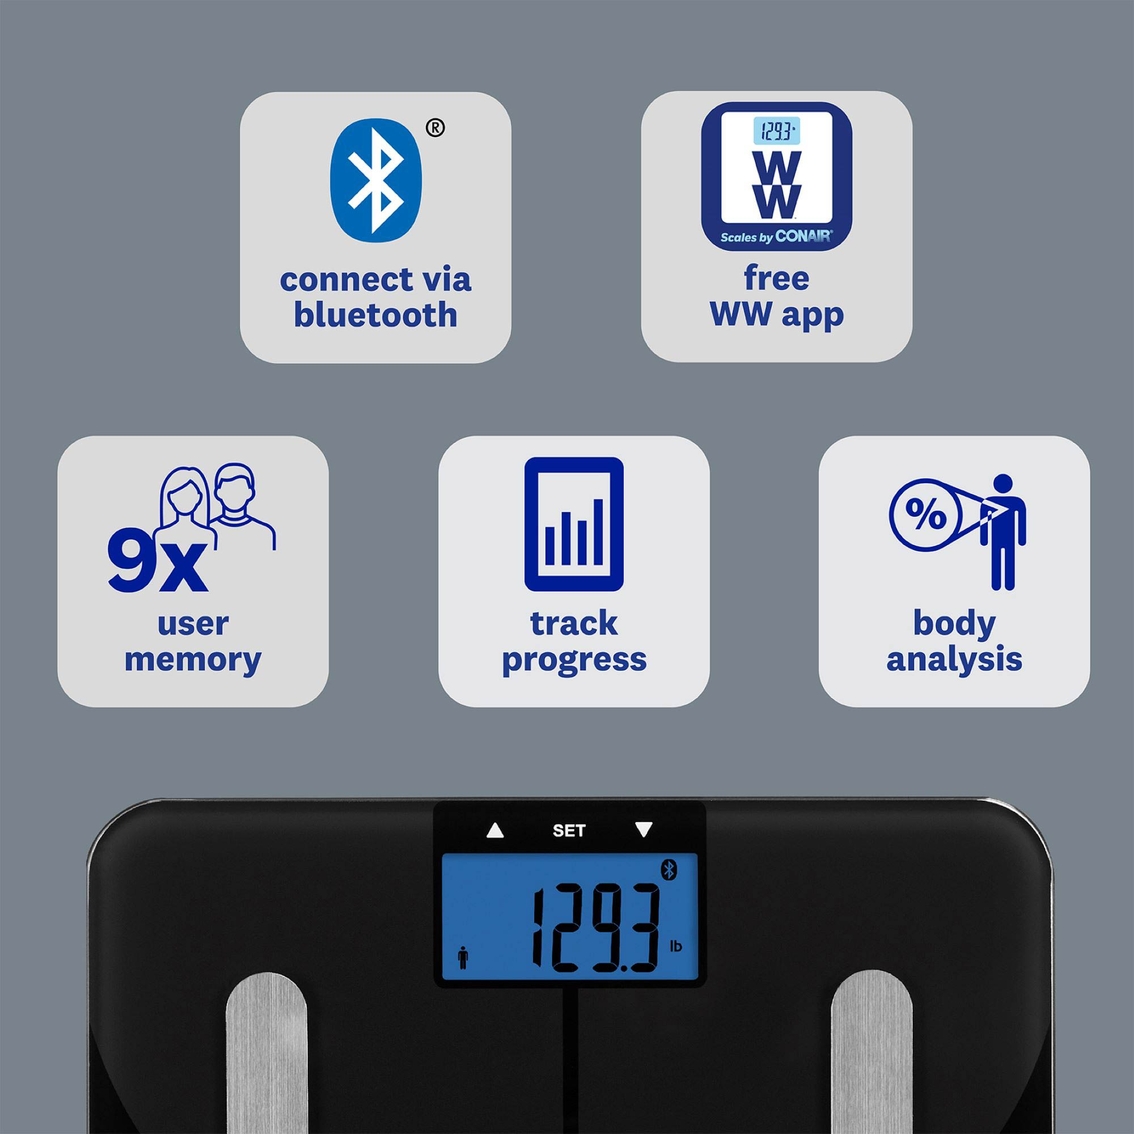 WW Scales by Conair Digital Bluetooth Body Analysis Scale - Image 5 of 5